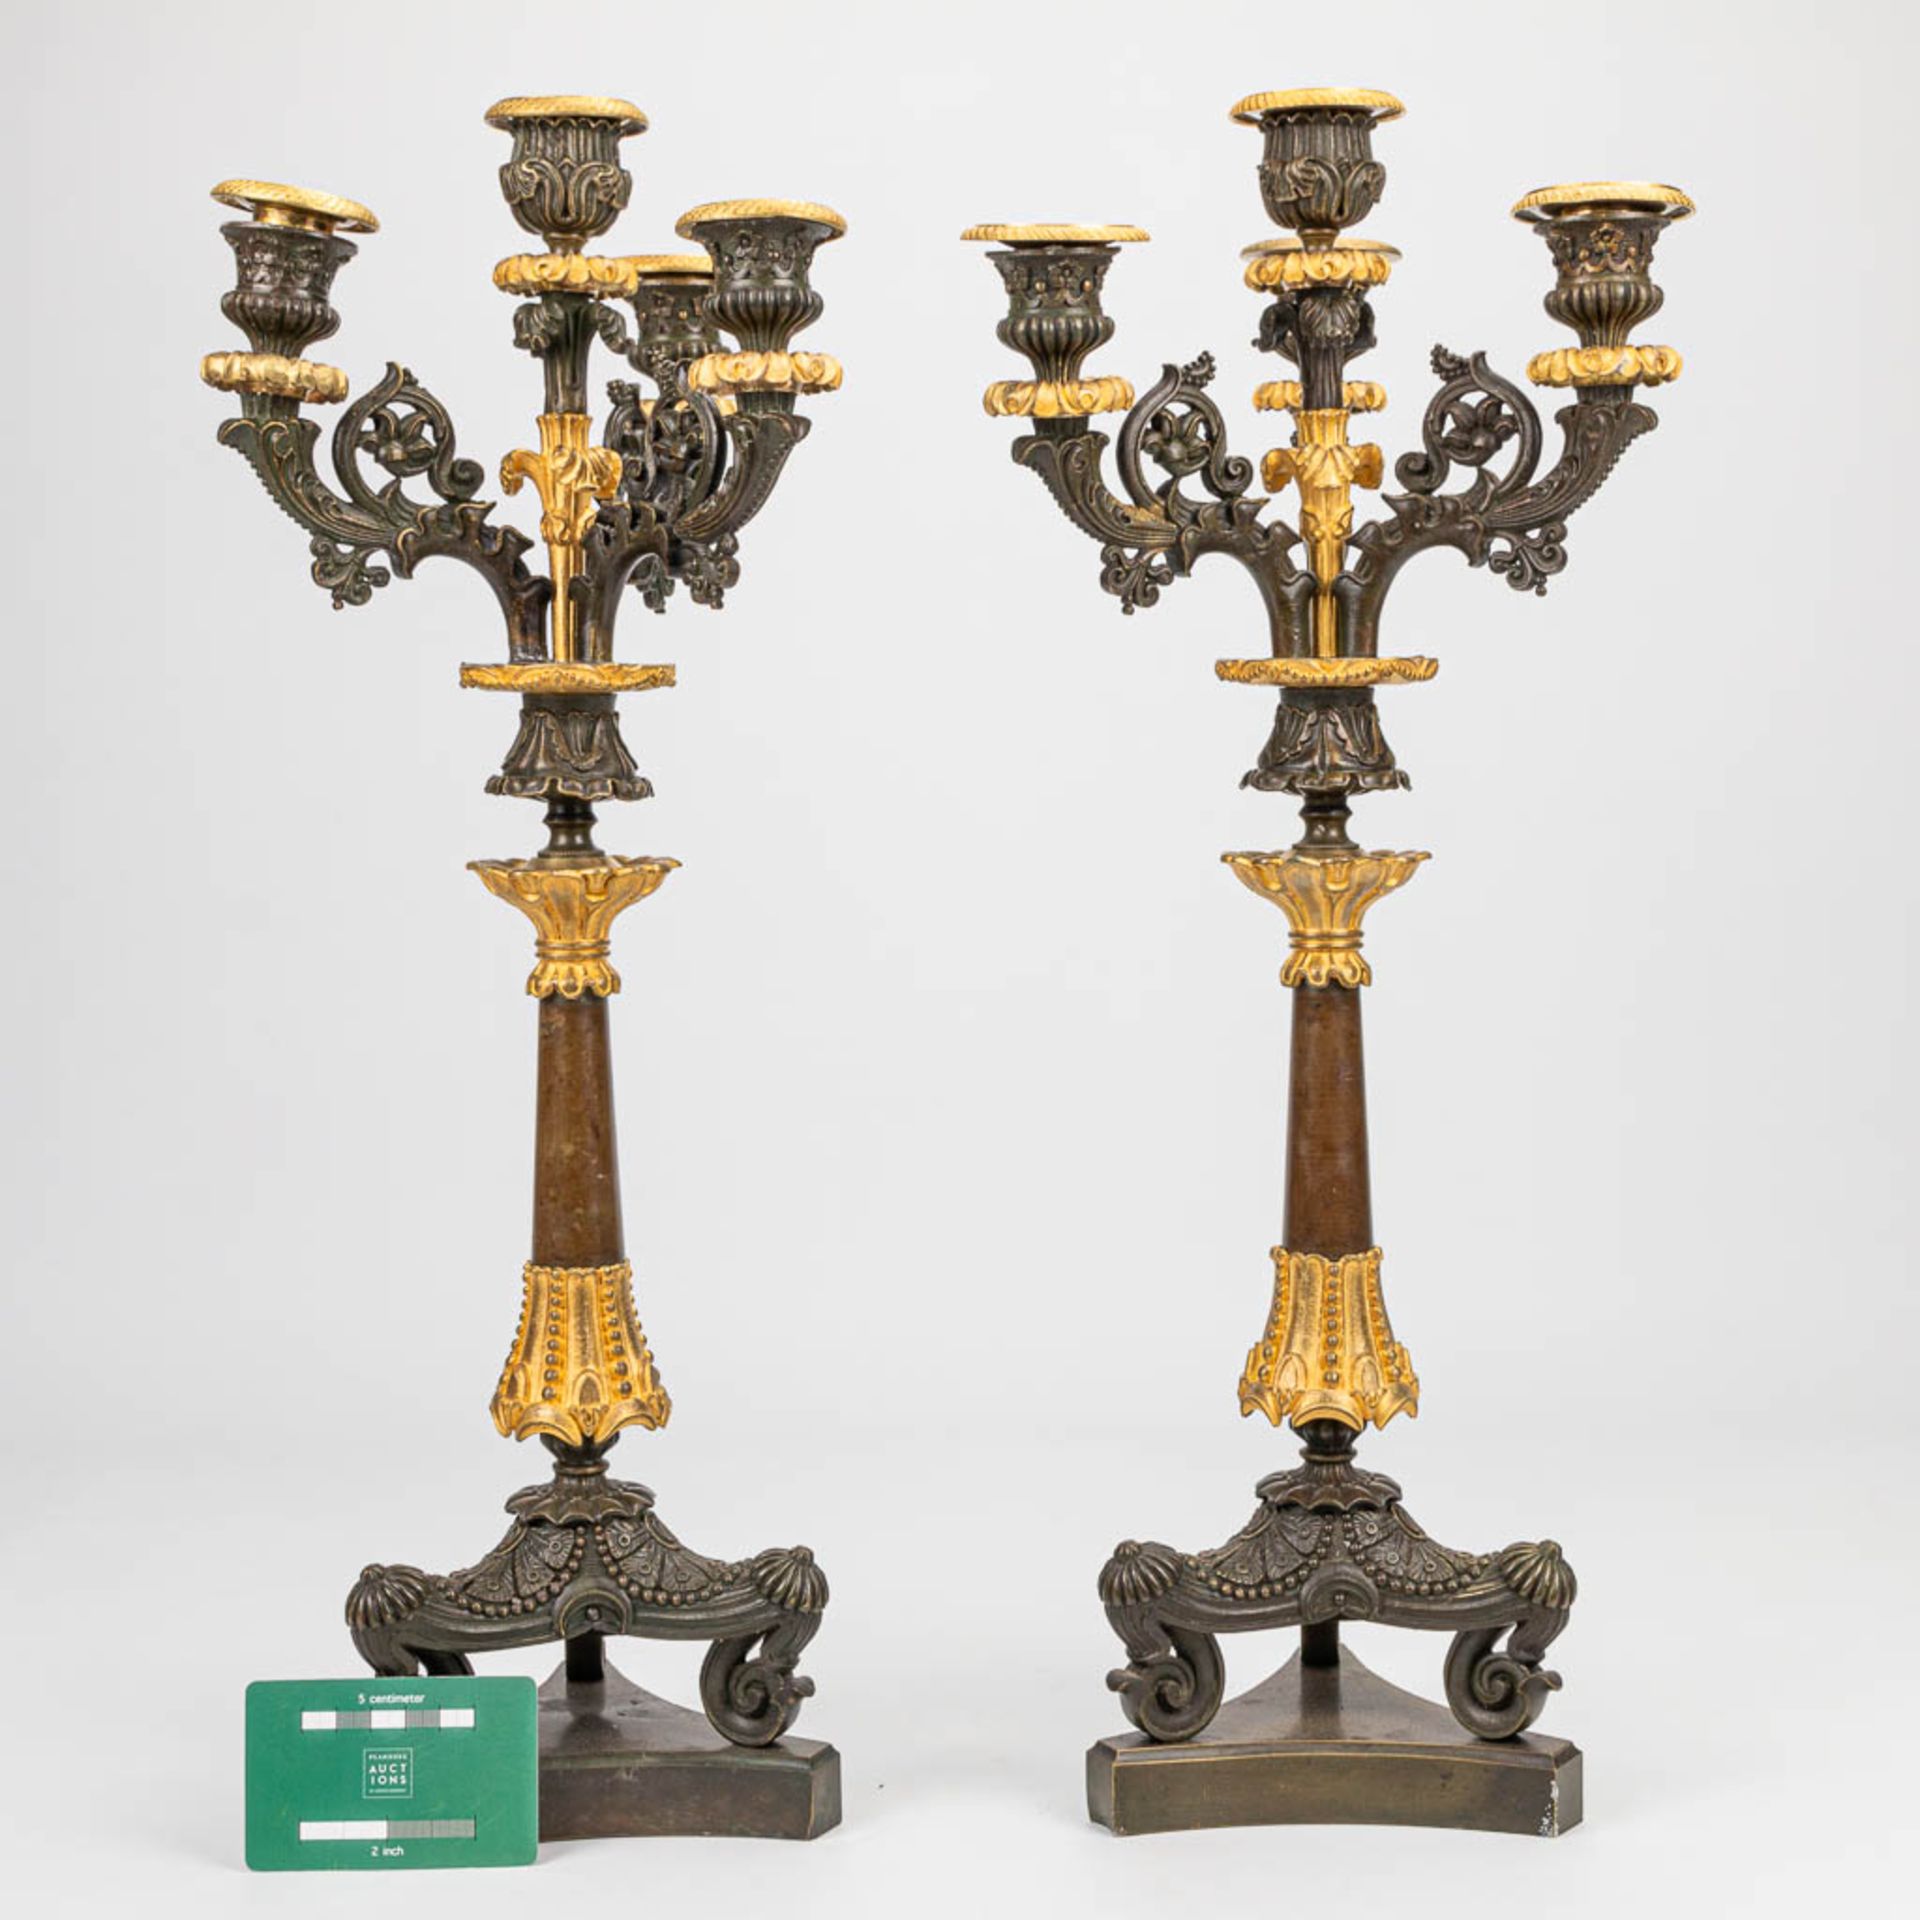 A pair of candelabra with gilt and patinated bronze in empire style, of the period. (16 x 20 x 51 cm - Image 2 of 6